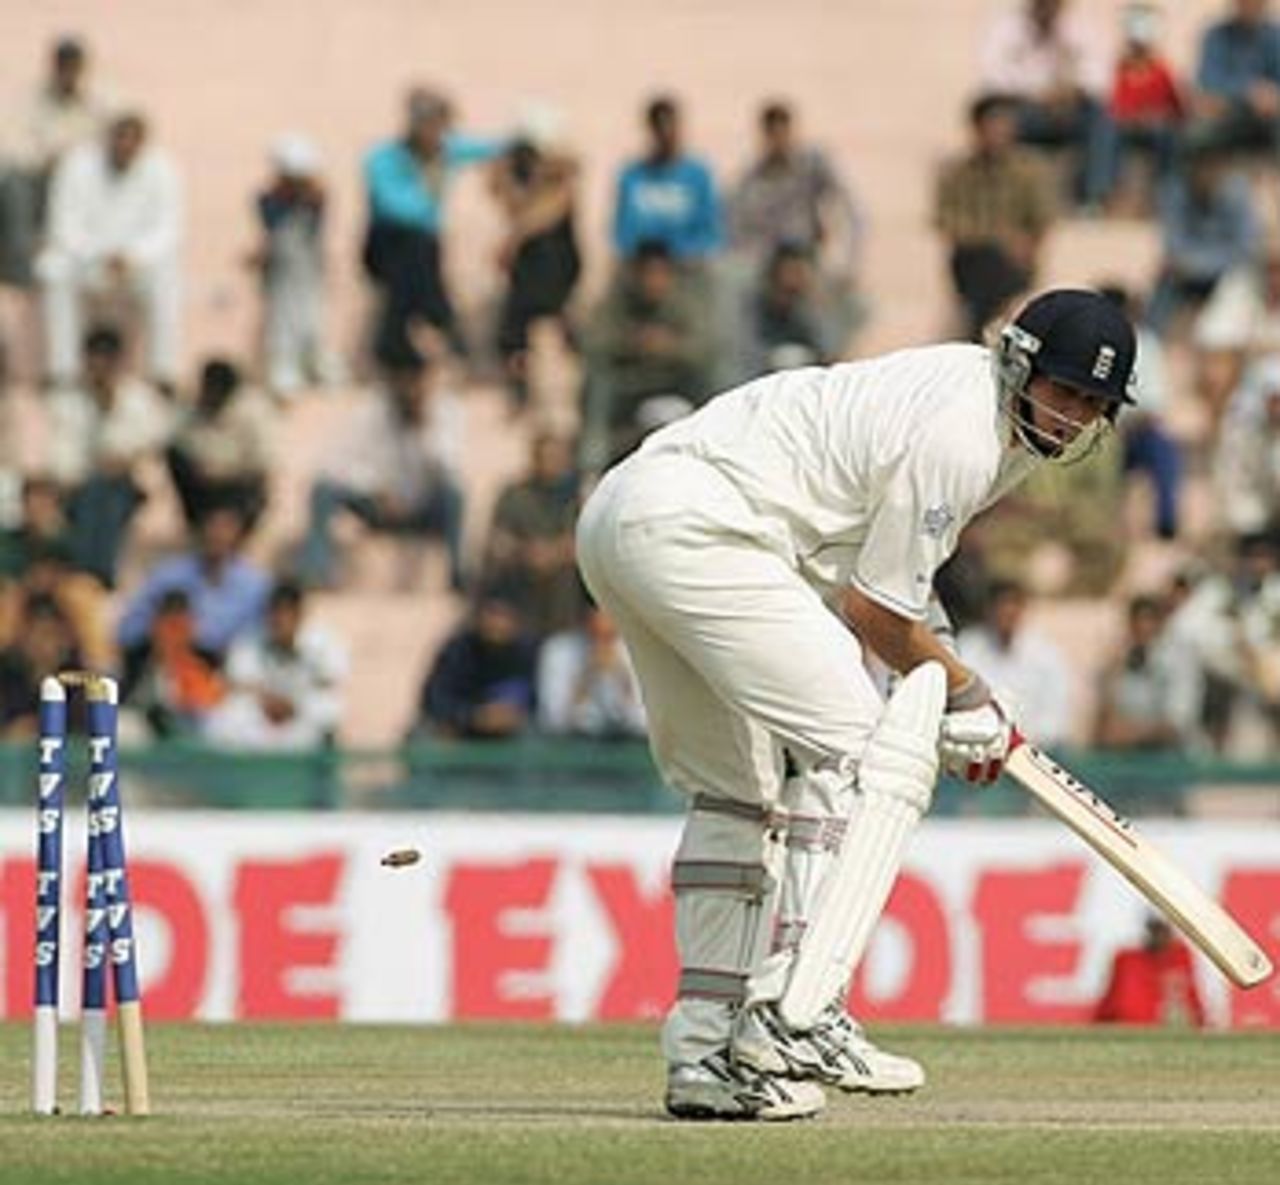 Matthew Hoggard has no clue to this one from Munaf Patel, India v England, 2nd Test, Mohali, 5th day, March 13 2006